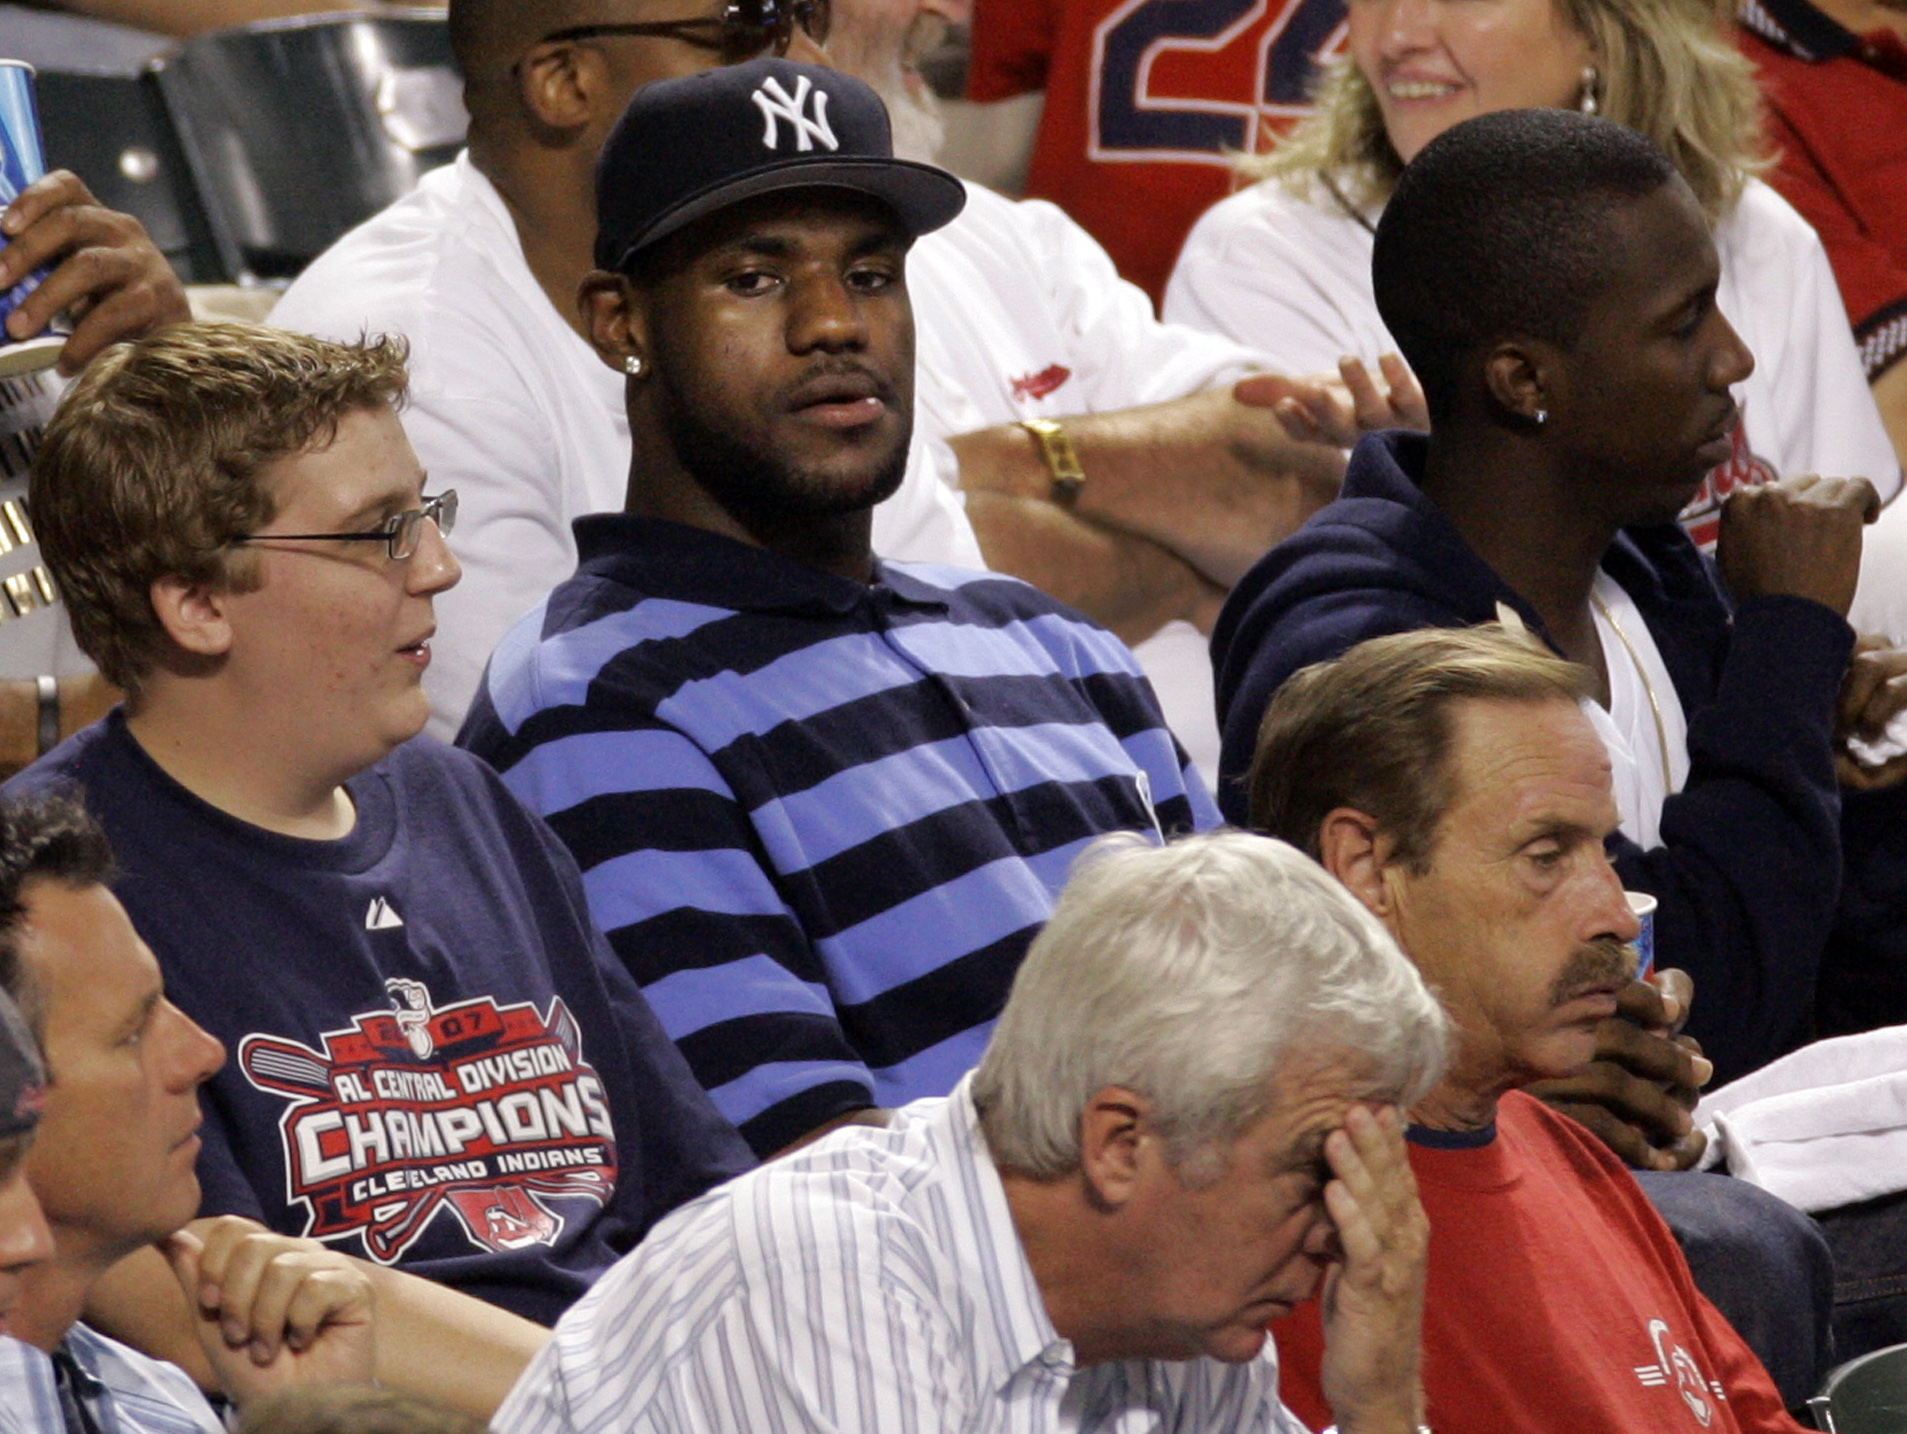 LeBron James, once a Yankees fan, to become part-owner of Boston Red Sox (report)